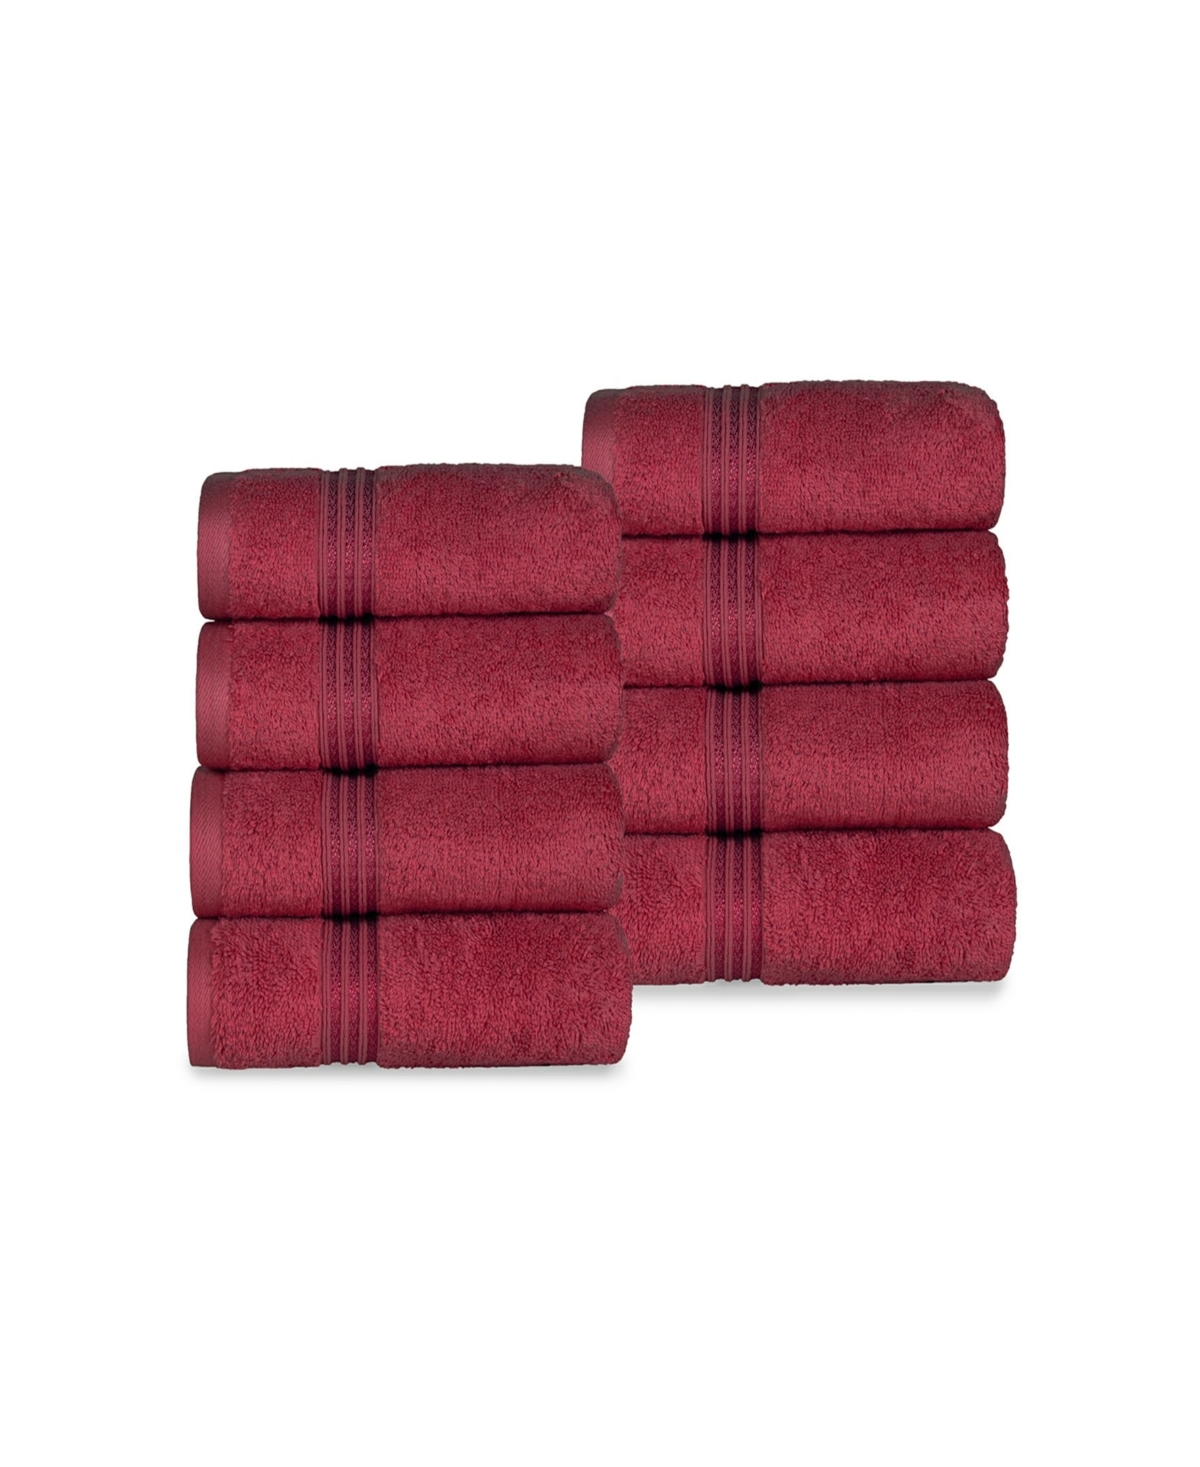 Superior Solid Quick Drying Absorbent 8 Piece Egyptian Cotton Hand Towel Set Bedding In Burgundy